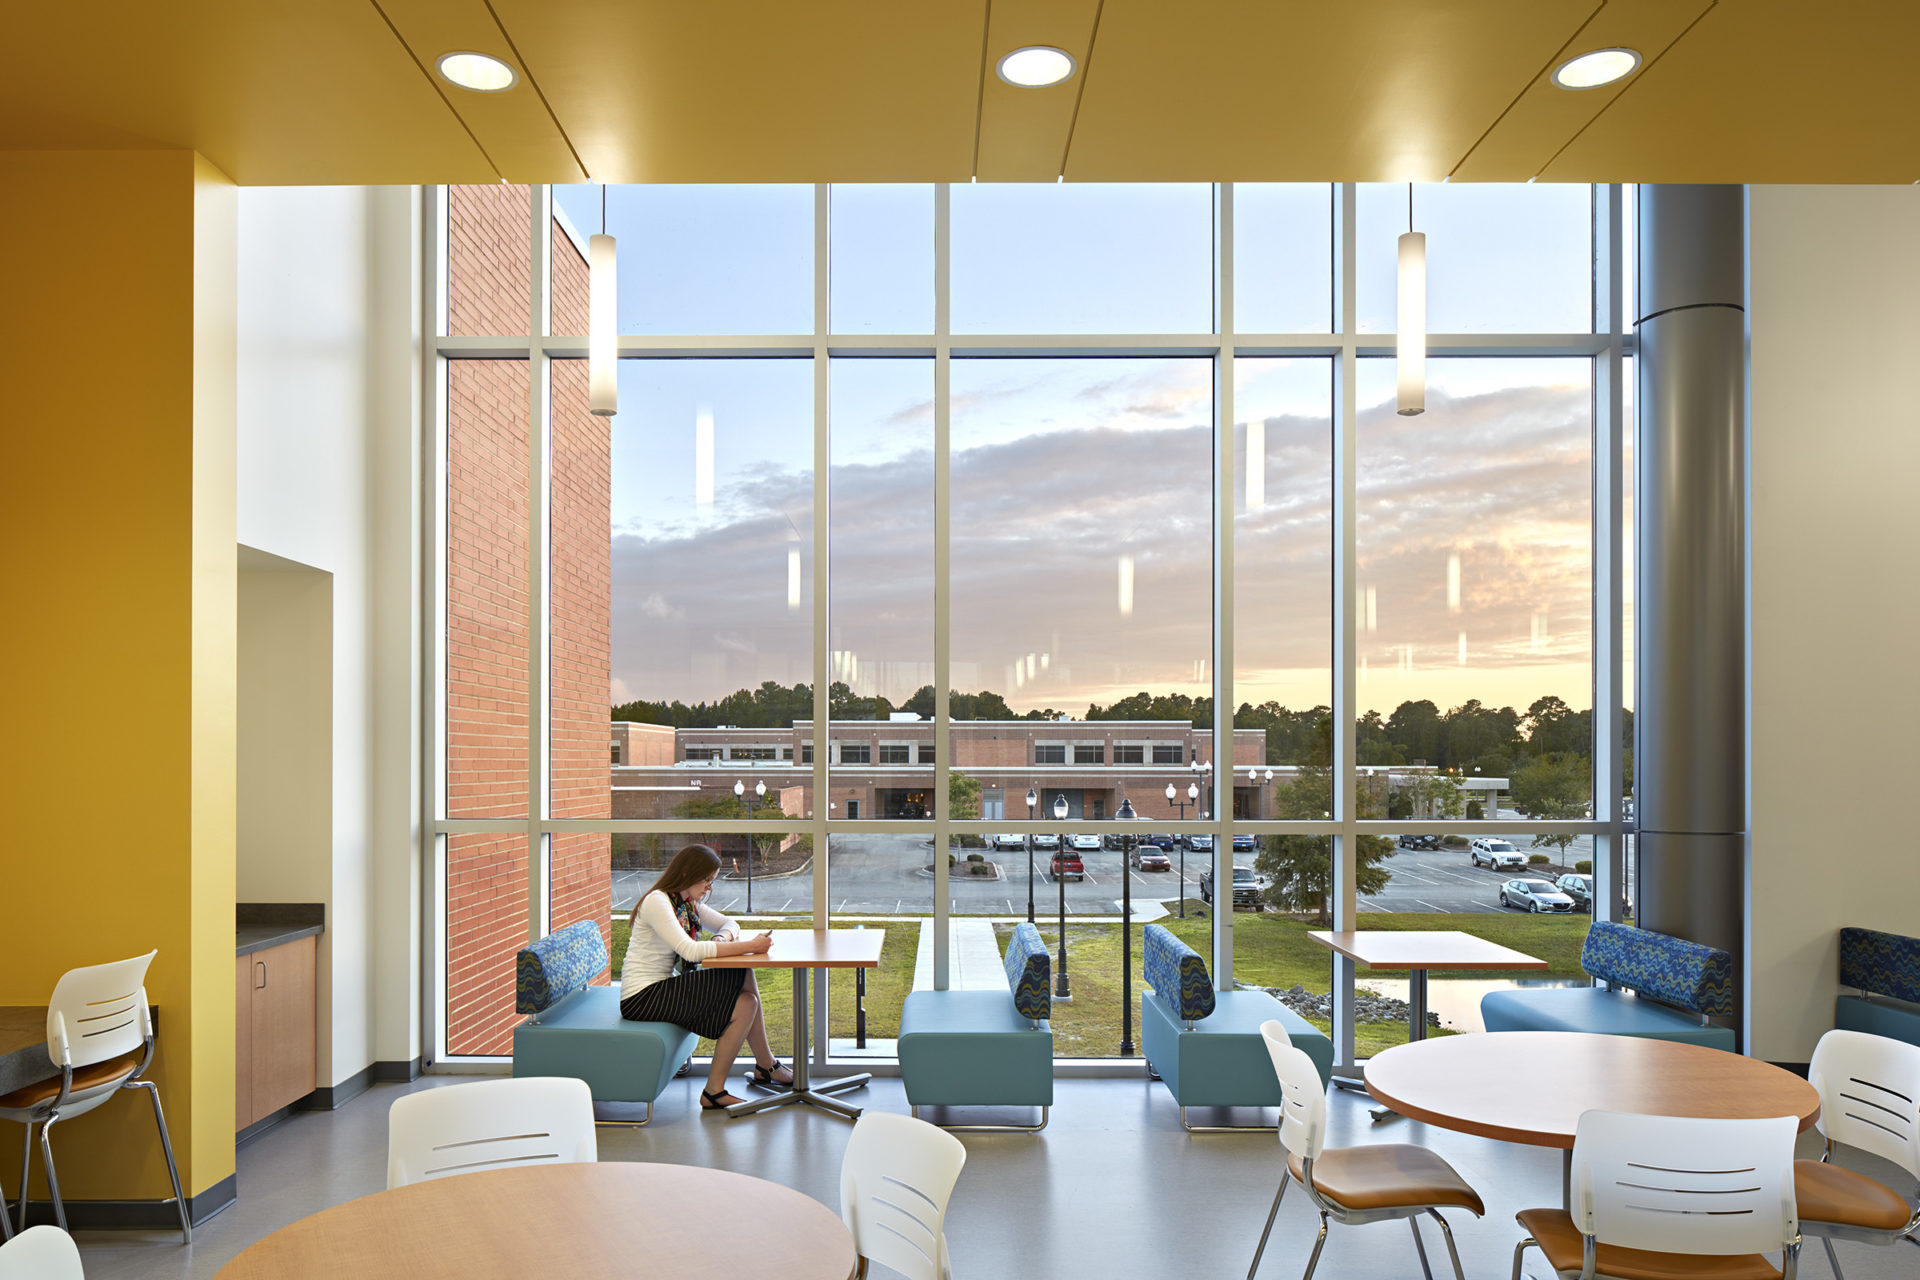 Student lounge detail at the Advanced & Emerging Technologies Building (A+ET) at Cape Fear Community College in Castle Hayne, NC; Architect: Clark Nexsen